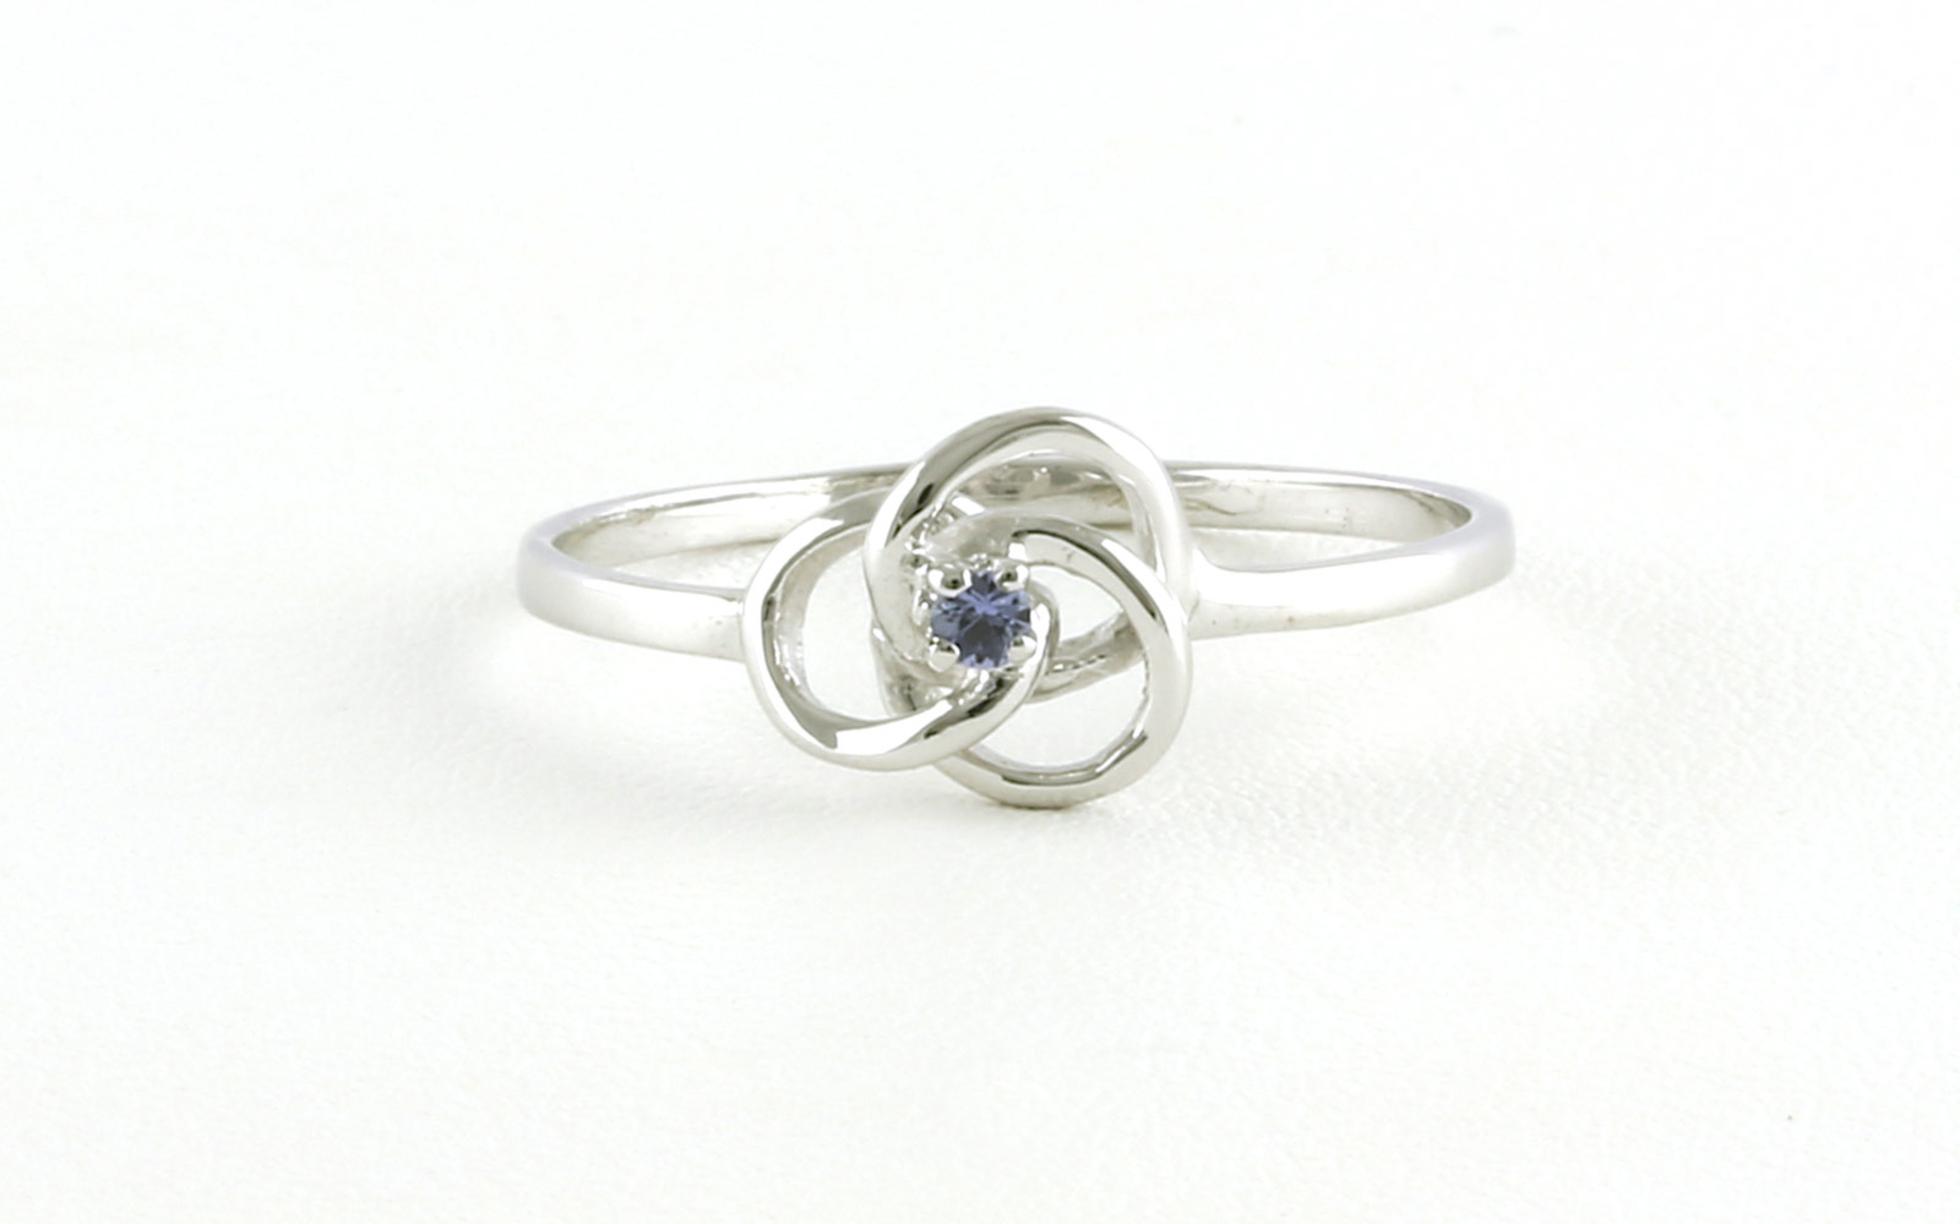 Flower Knot Montana Yogo Sapphire Ring in Sterling Silver (0.04cts)